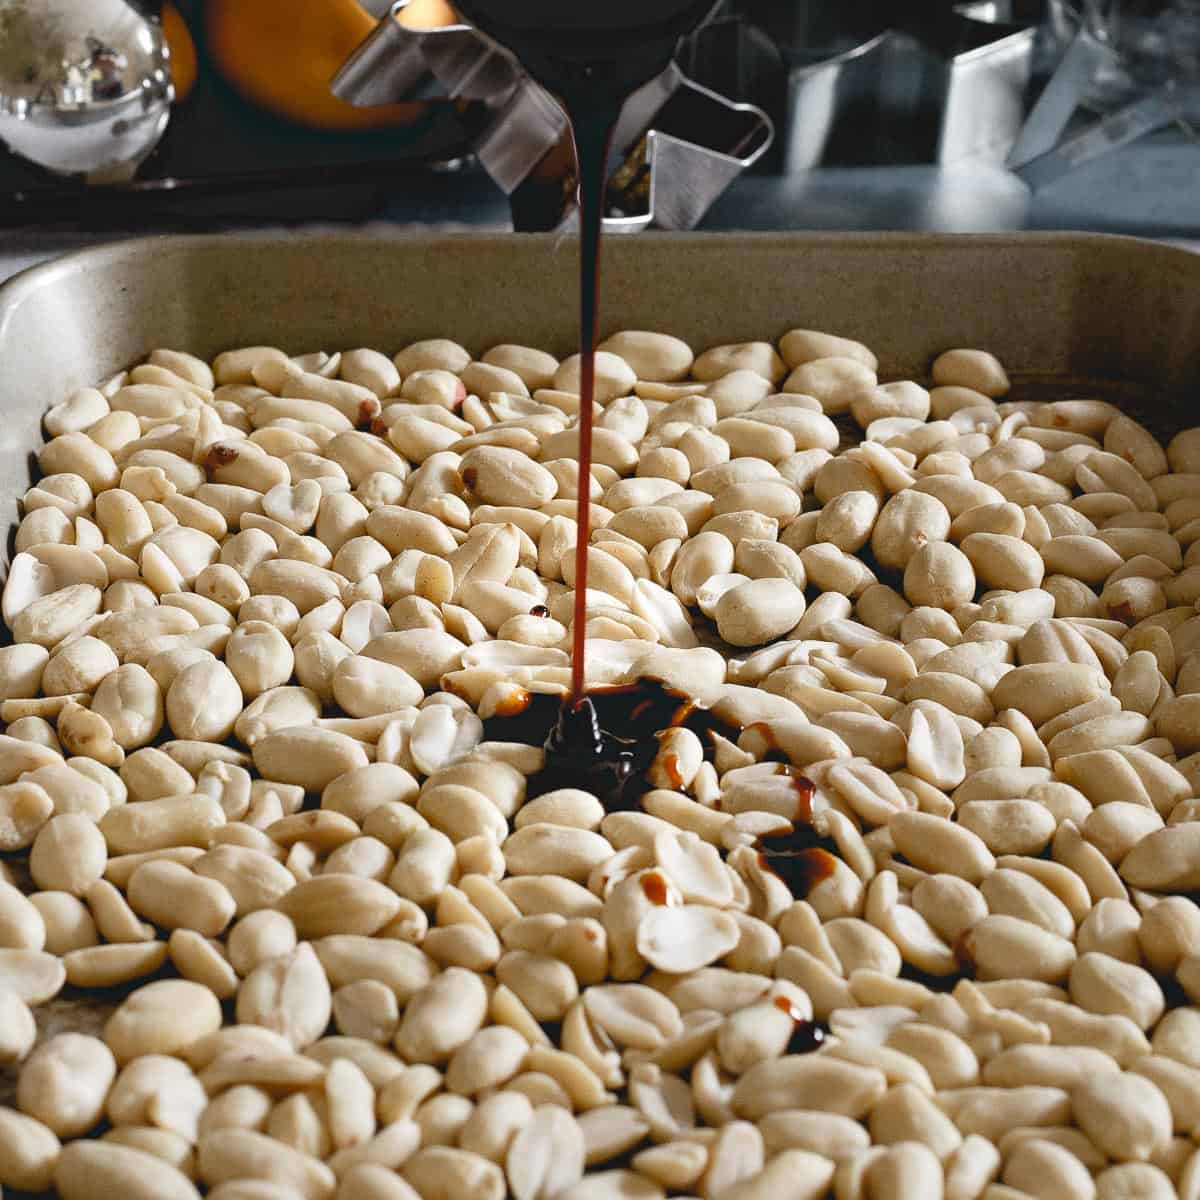 Pouring molasses over raw peanuts before roasting.